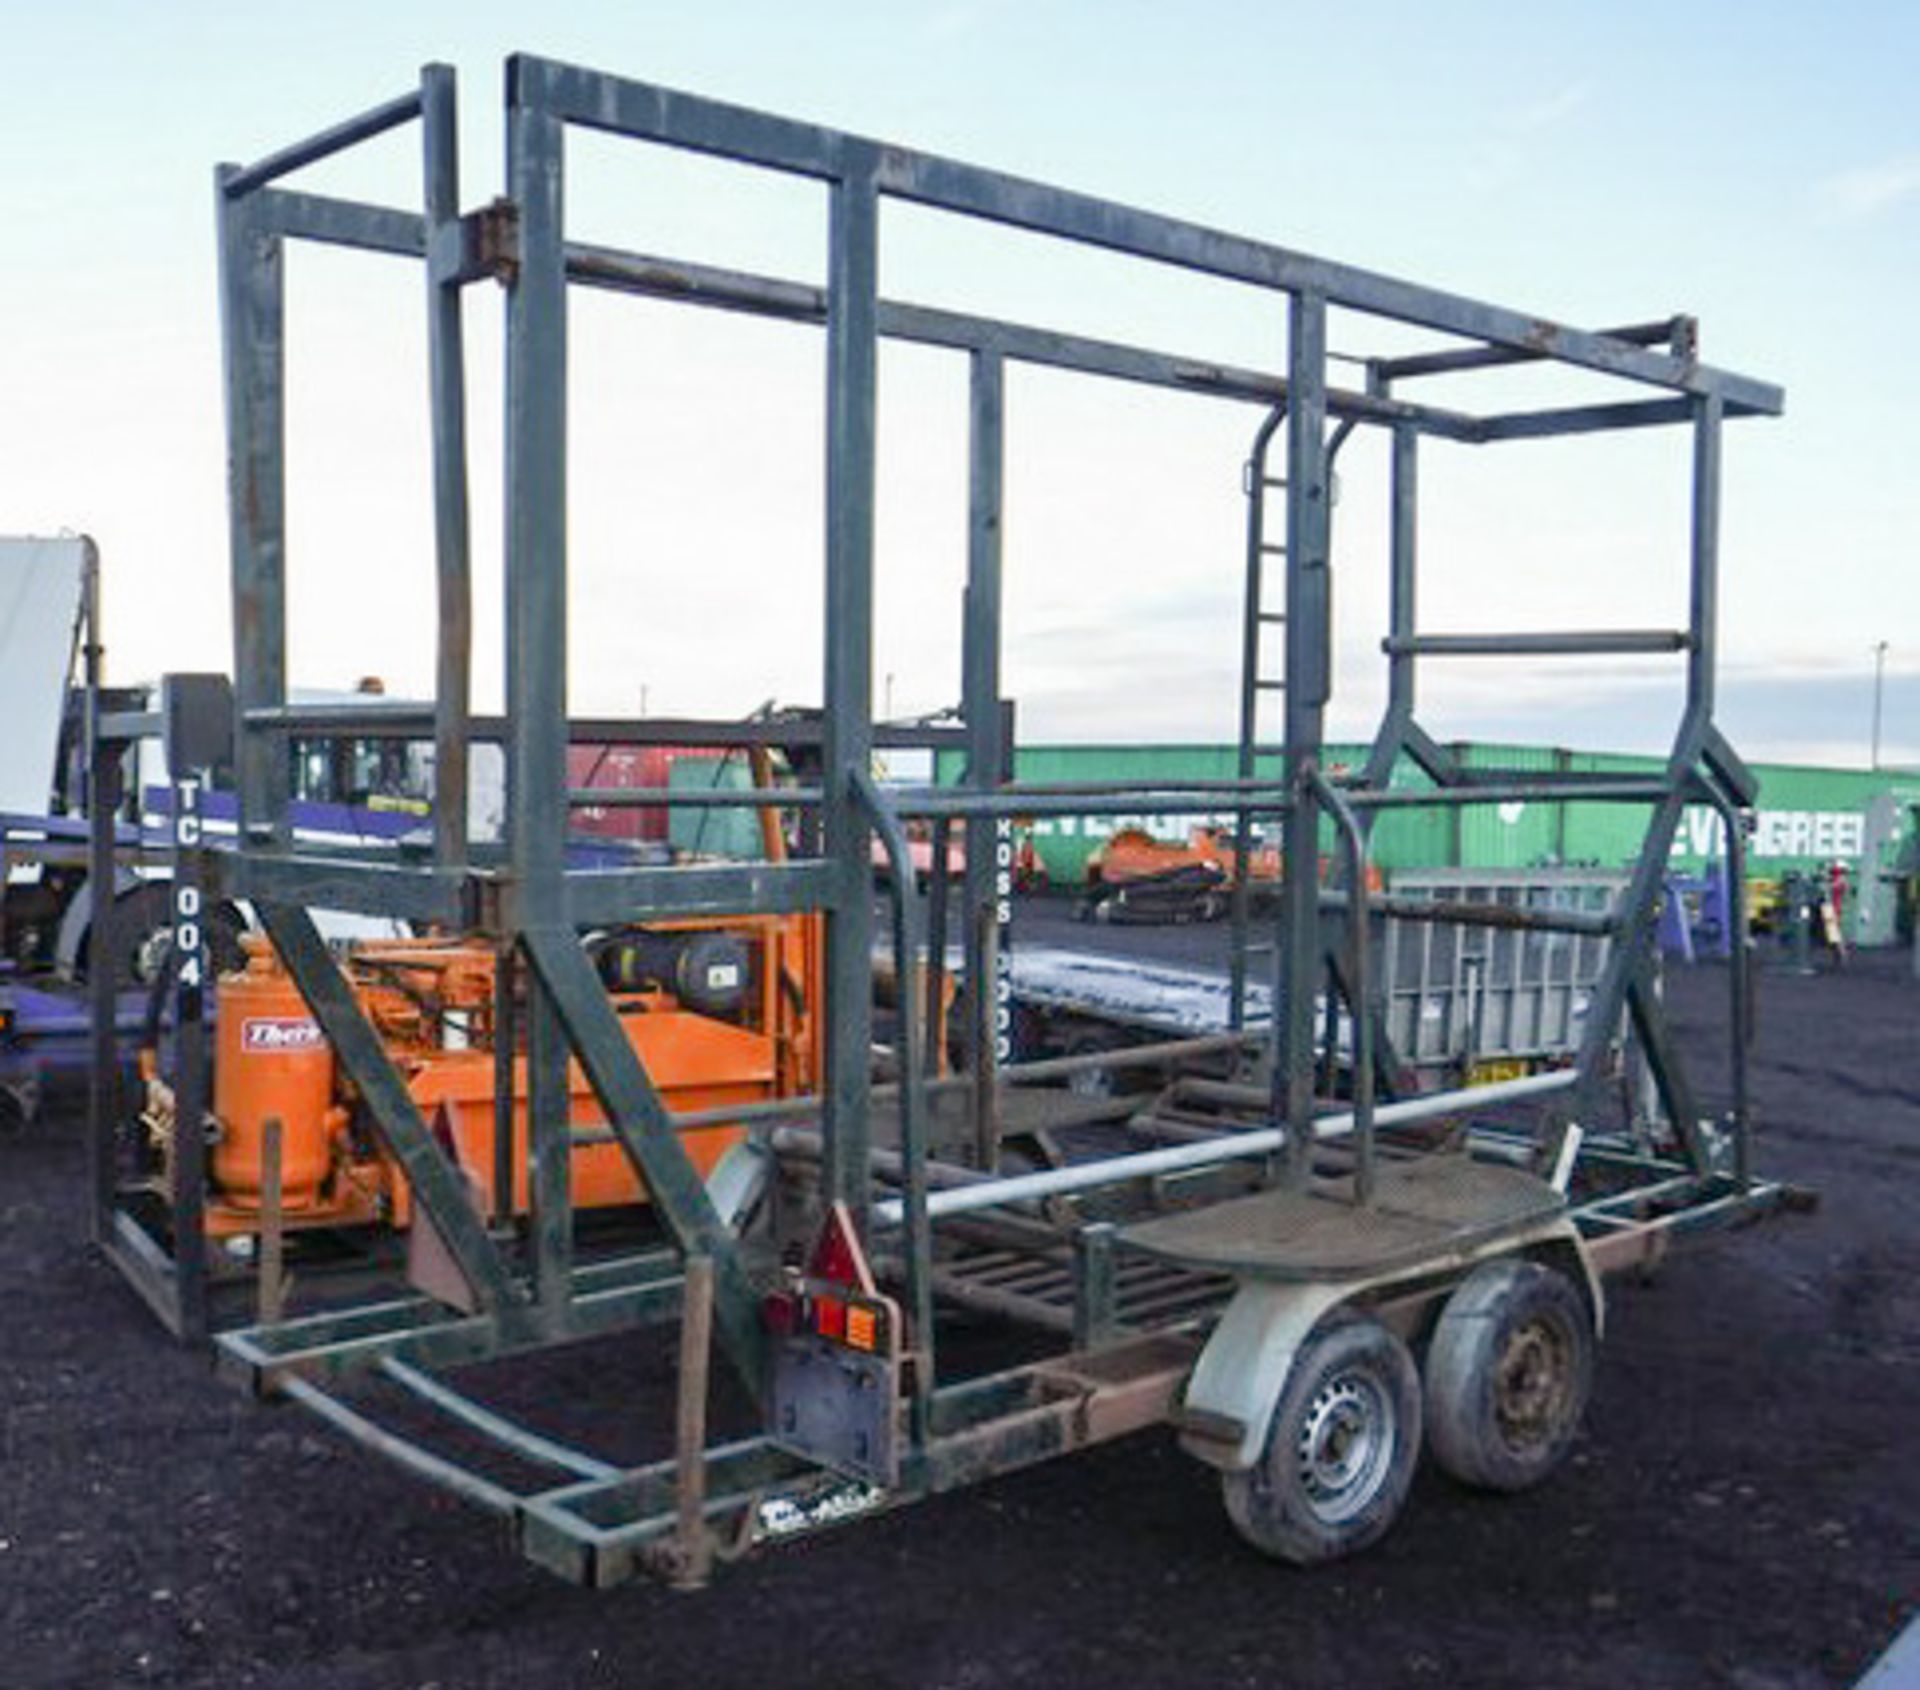 COIL CARRYING TRAILER BRAKED AND LED LIGHTS - Image 2 of 5